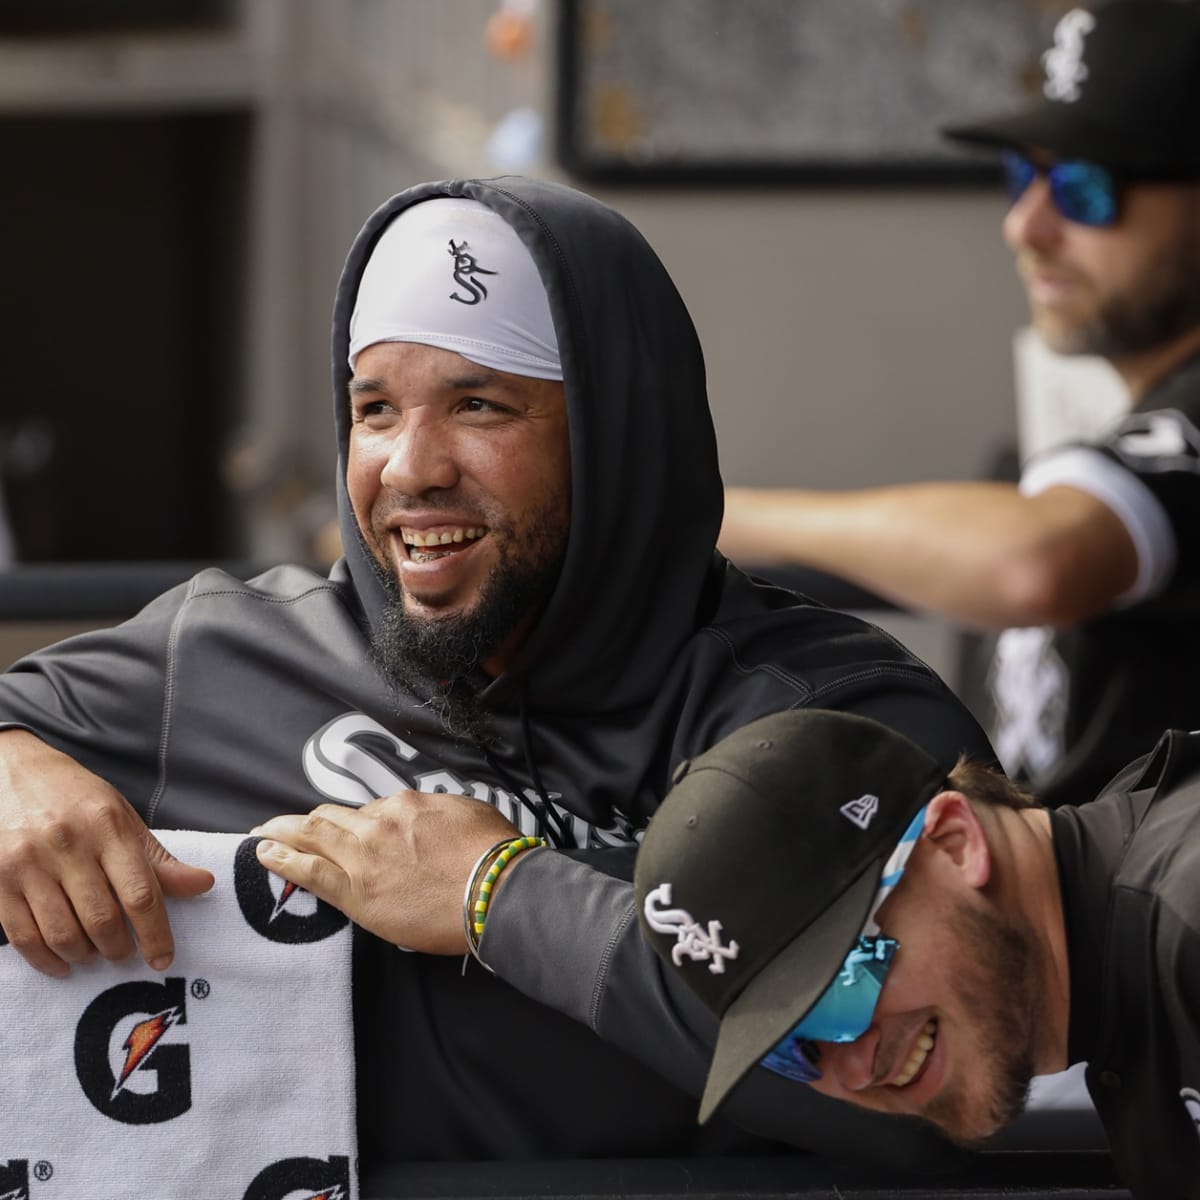 Could this be José Abreu's last season with the Chicago White Sox